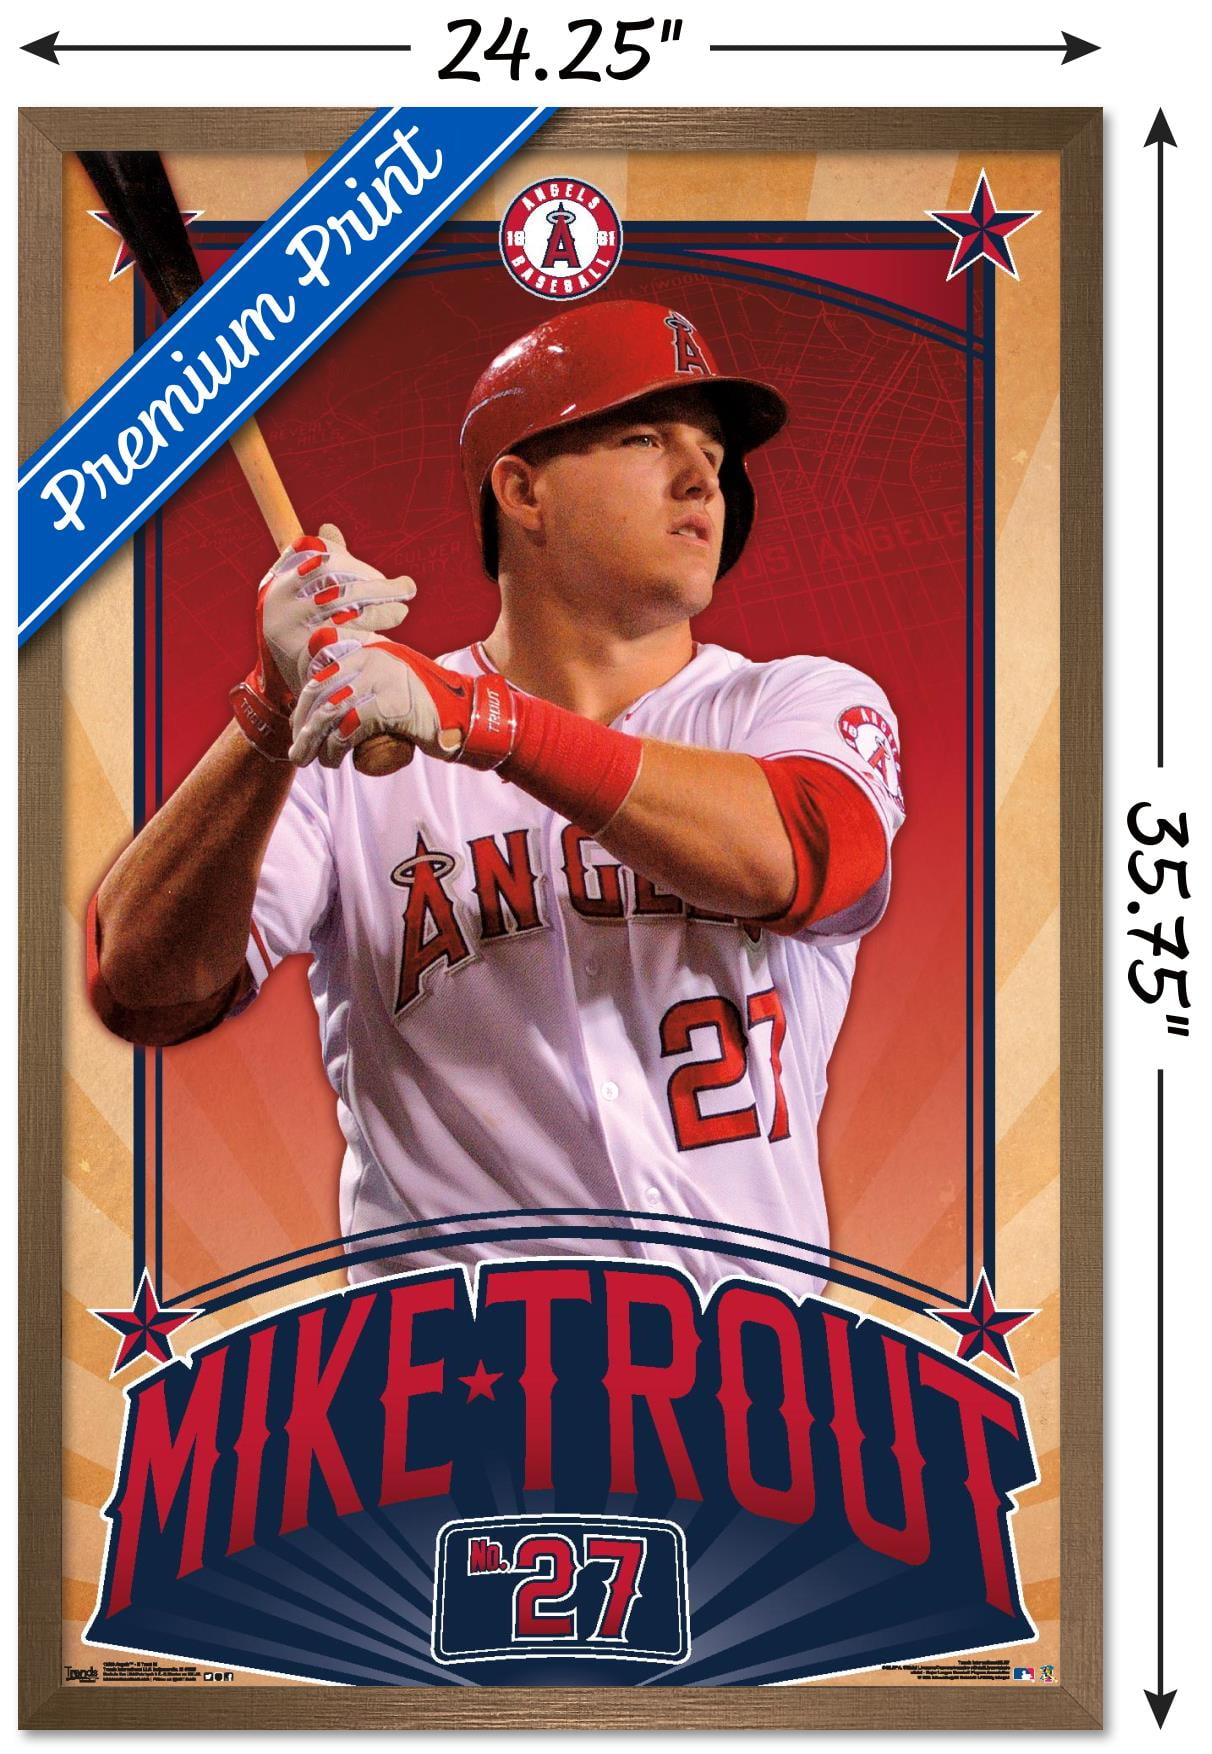 Mike Trout TEAM USA by PosterTheMoster on DeviantArt